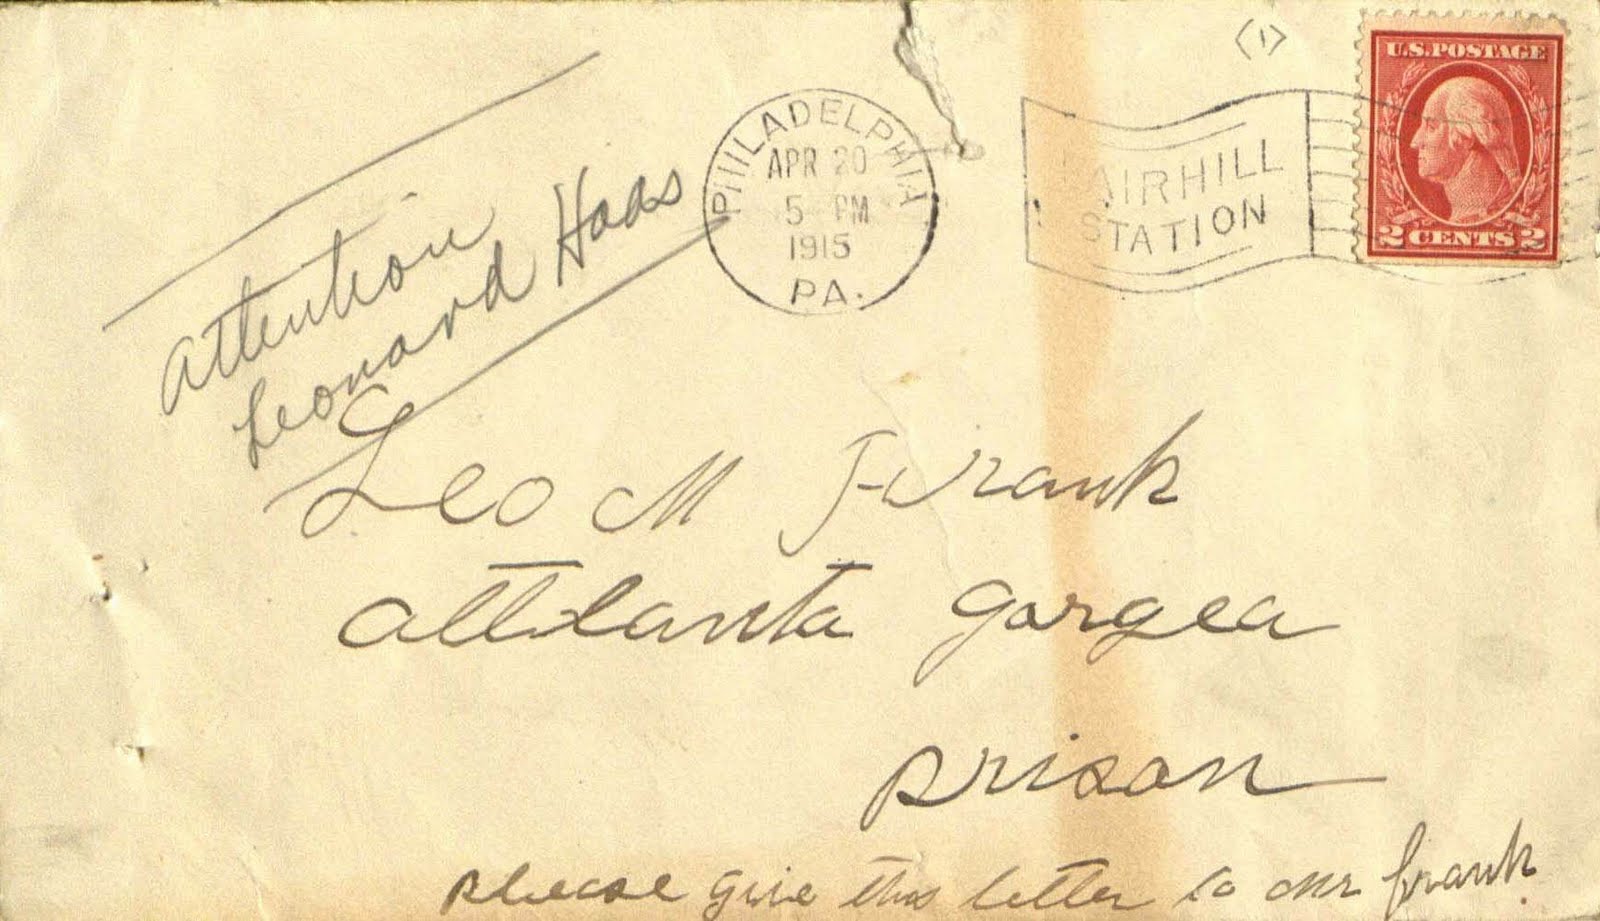 Scan of an envelope addressed to Leo M Frank while Frank was in prison, stamped on April 20, 1915 at 5 p.m. Philadelphia time